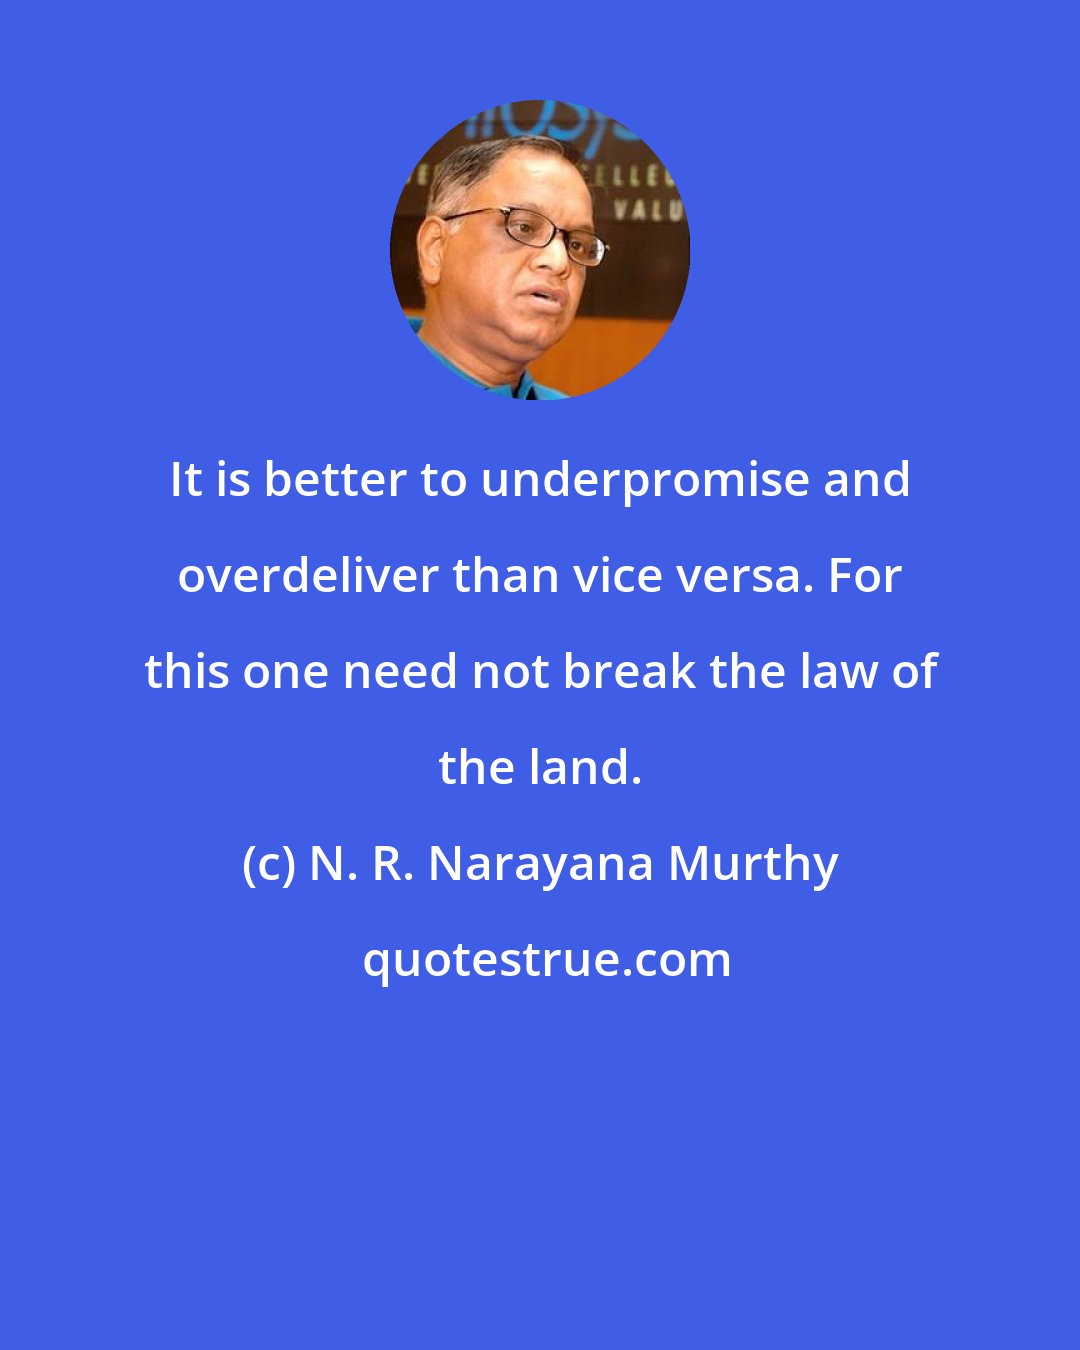 N. R. Narayana Murthy: It is better to underpromise and overdeliver than vice versa. For this one need not break the law of the land.